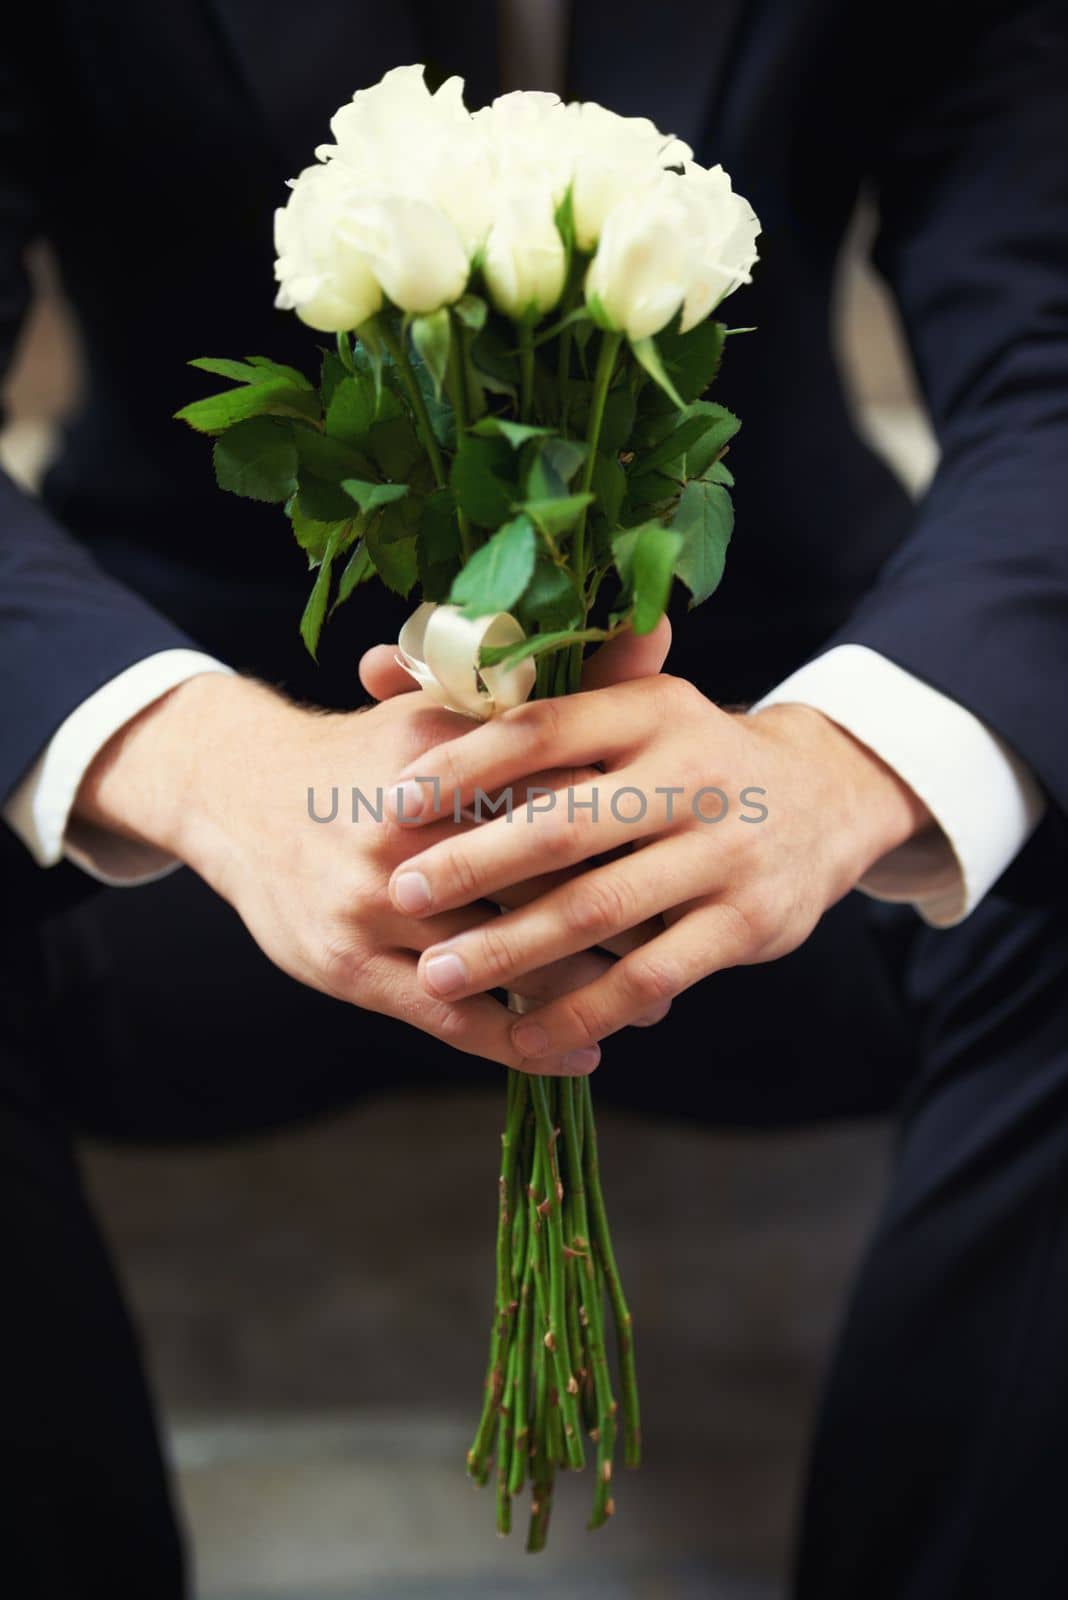 Hands, flowers and man on wedding day waiting for ceremony of love, tradition or romance closeup. Floral bouquet, marriage and commitment with a groom sitting outdoor alone at a celebration event.